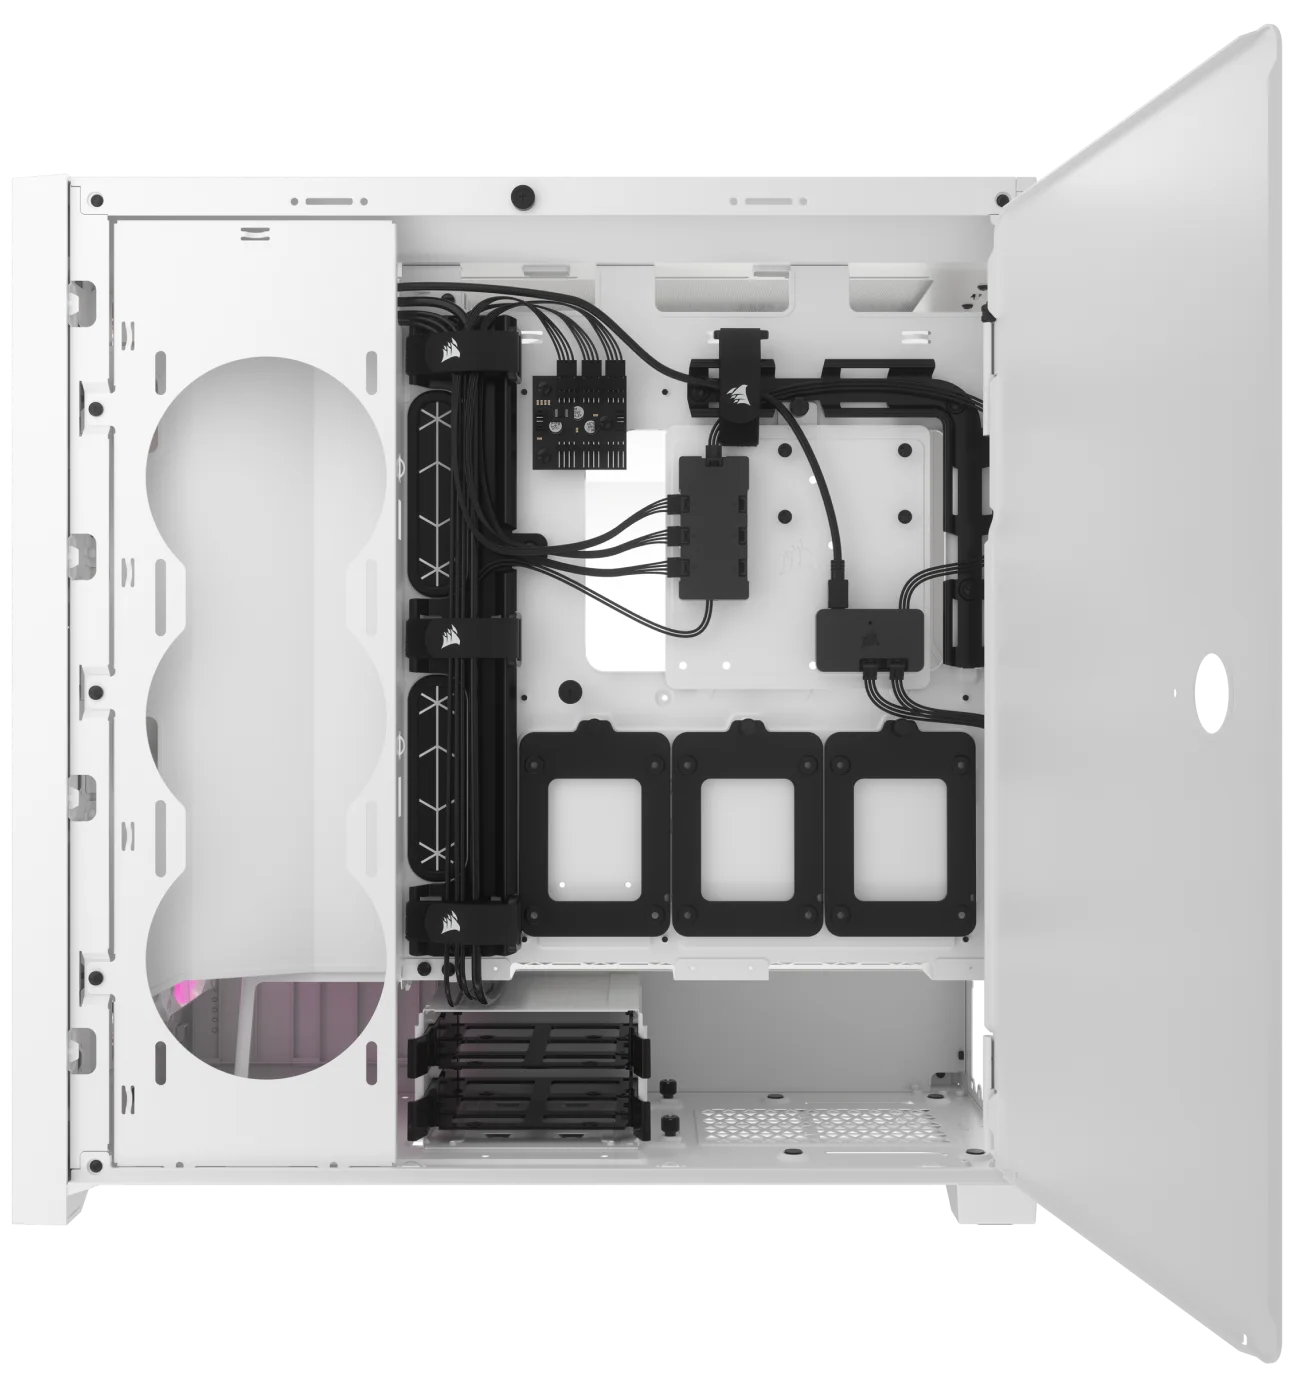 A graphics card mounted vertically in a 5000D RGB AIRFLOW case.